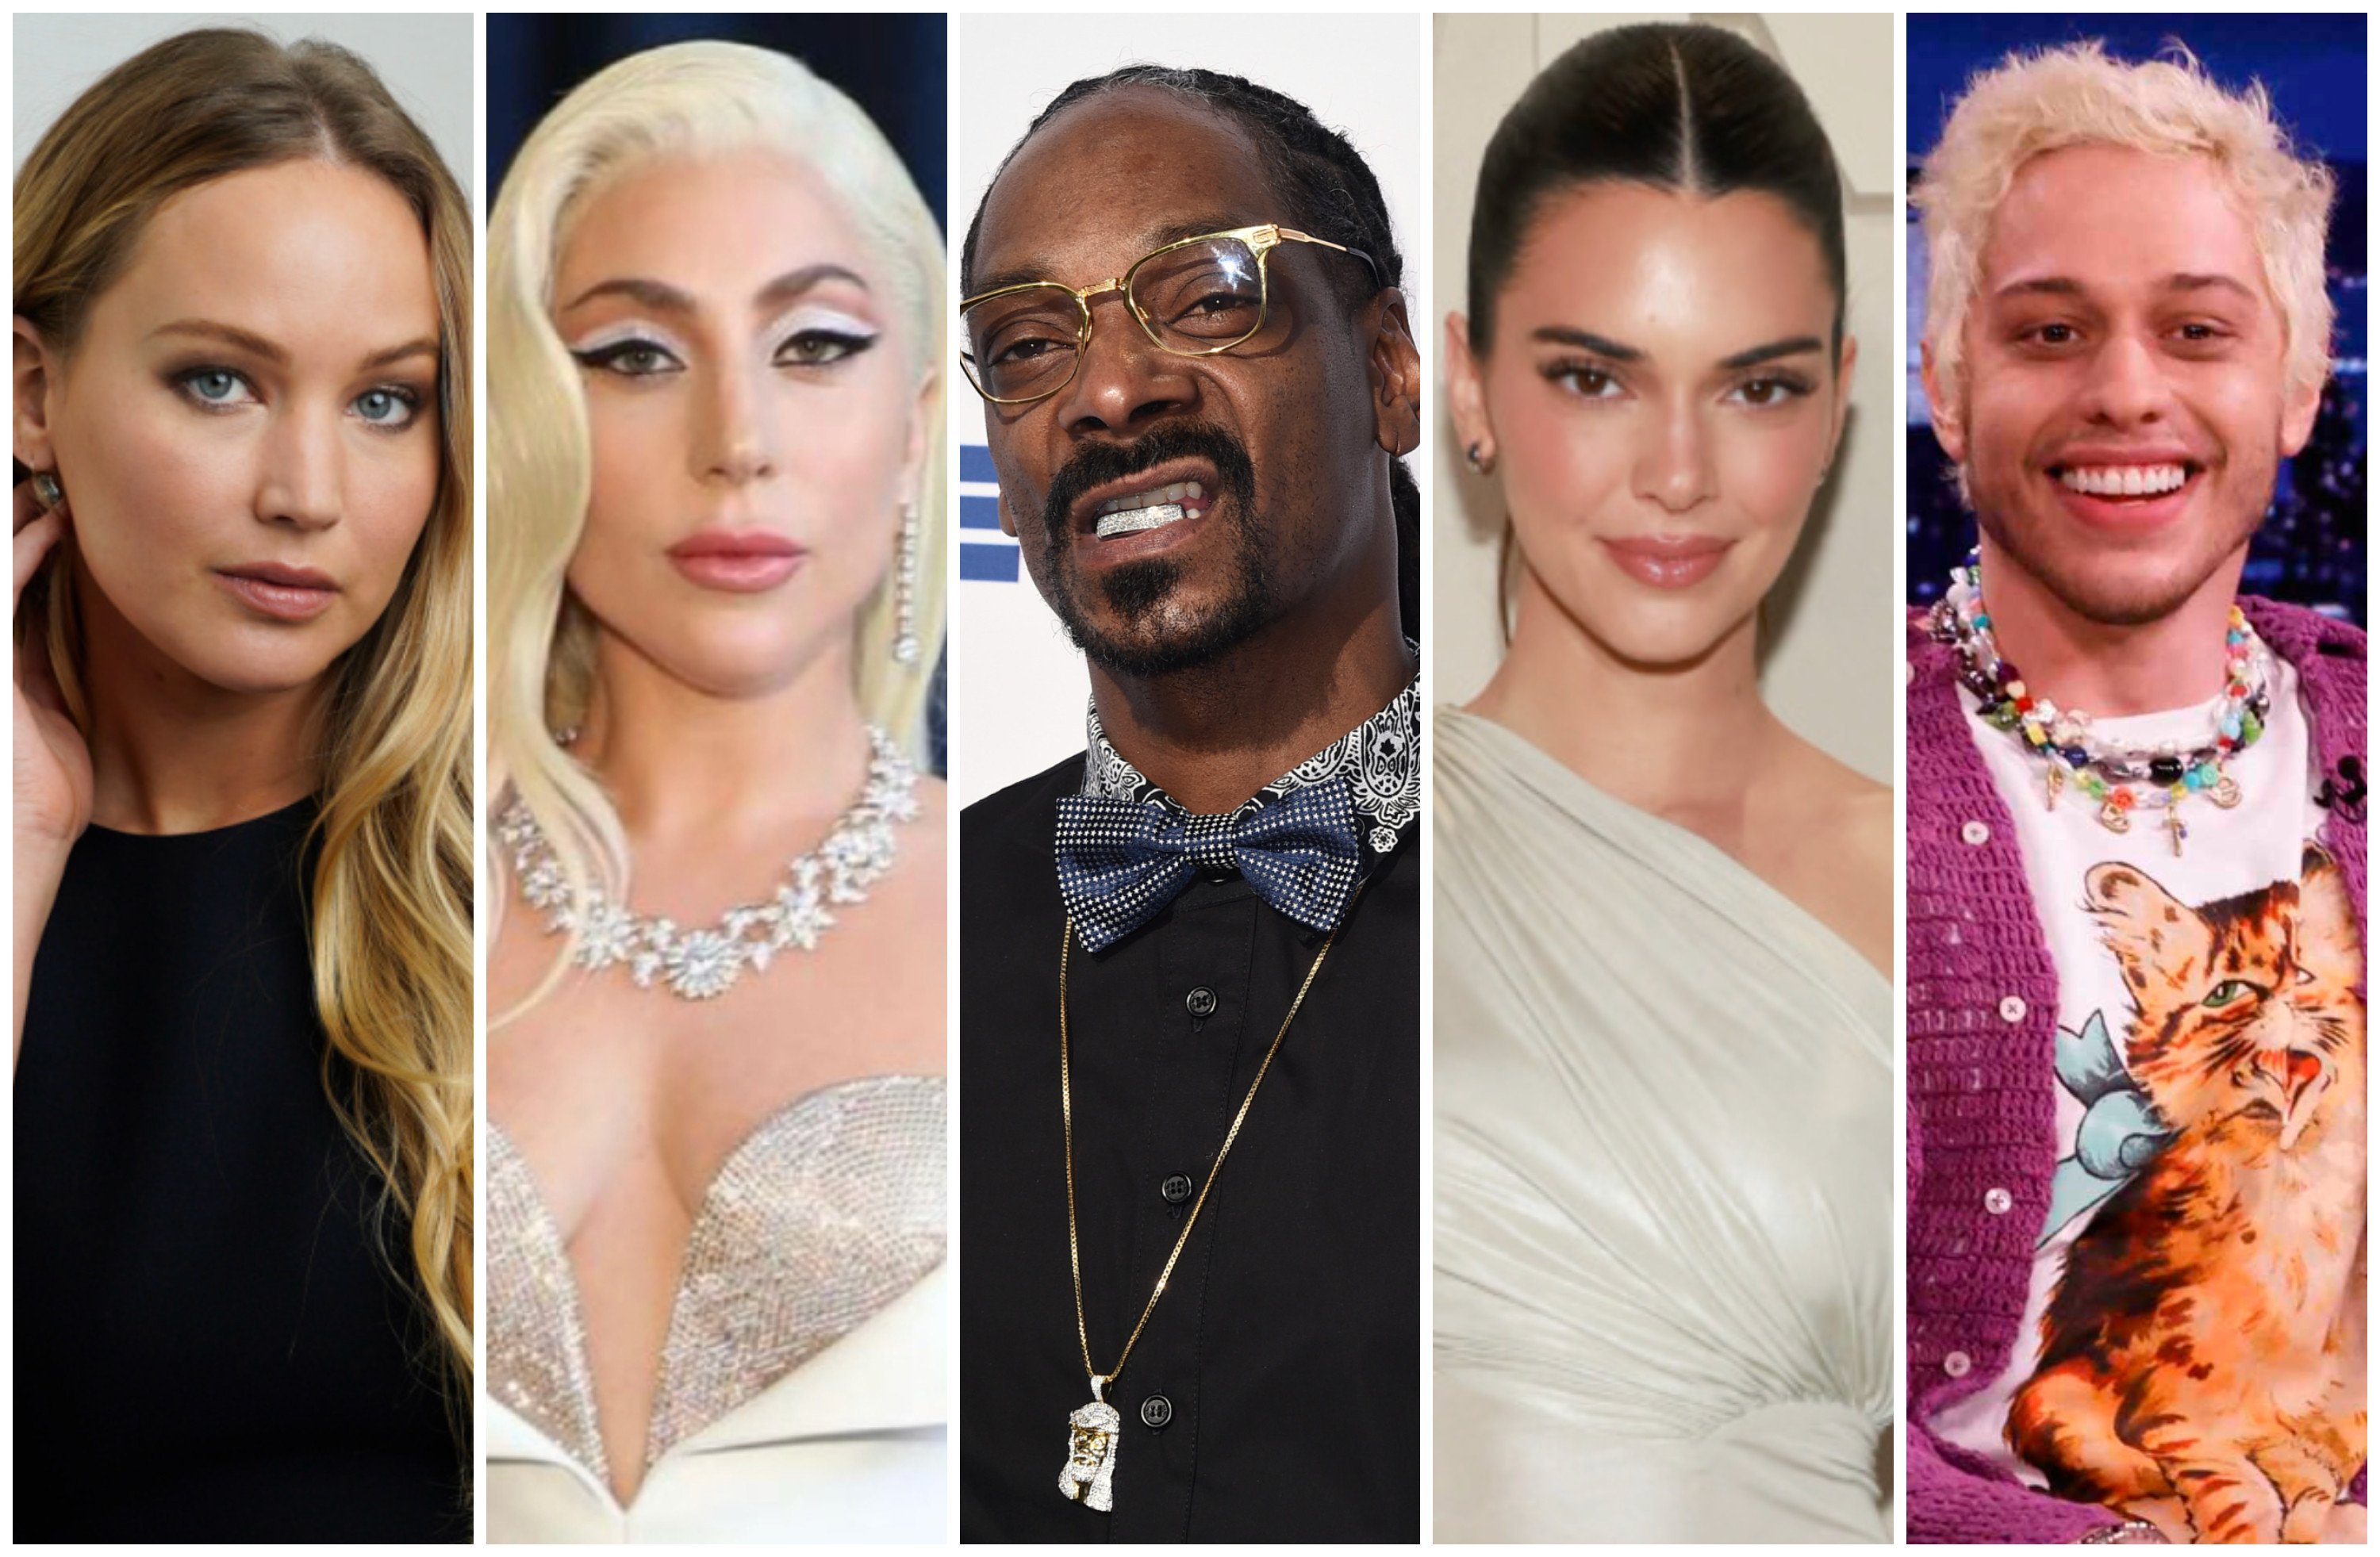 Jennifer Lawrence, Lady Gaga, Snoop Dogg, Kendall Jenner and Pete Davidson have all been honest about smoking cannabis. Photos: AP, @ladygaga/Instagram, AFP, Getty Images